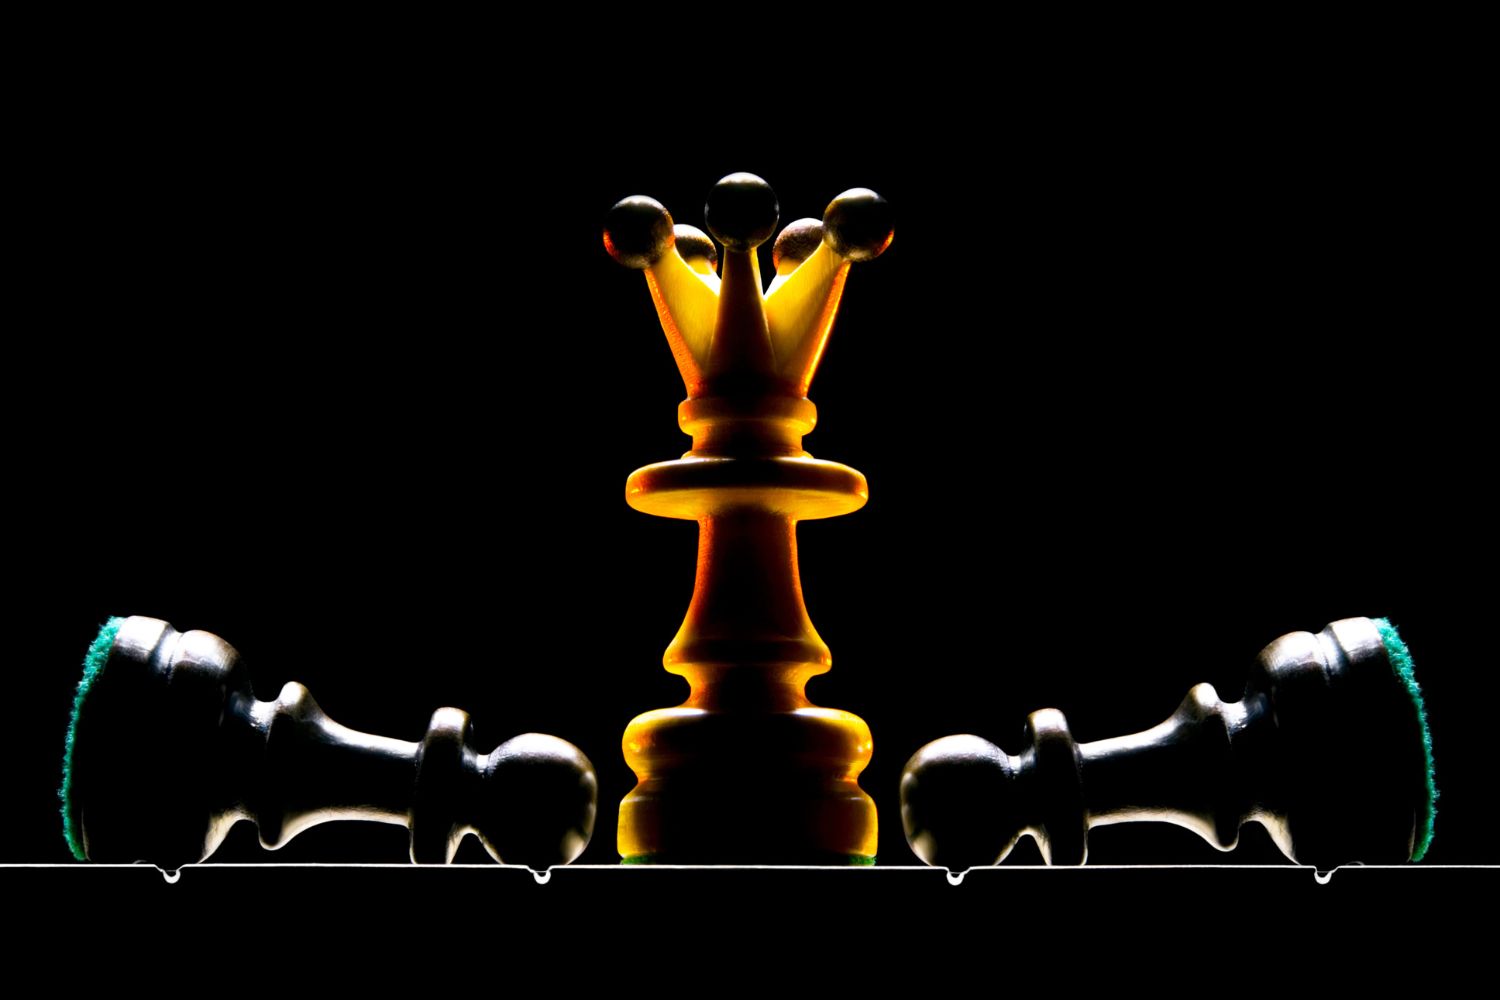 chess pieces image